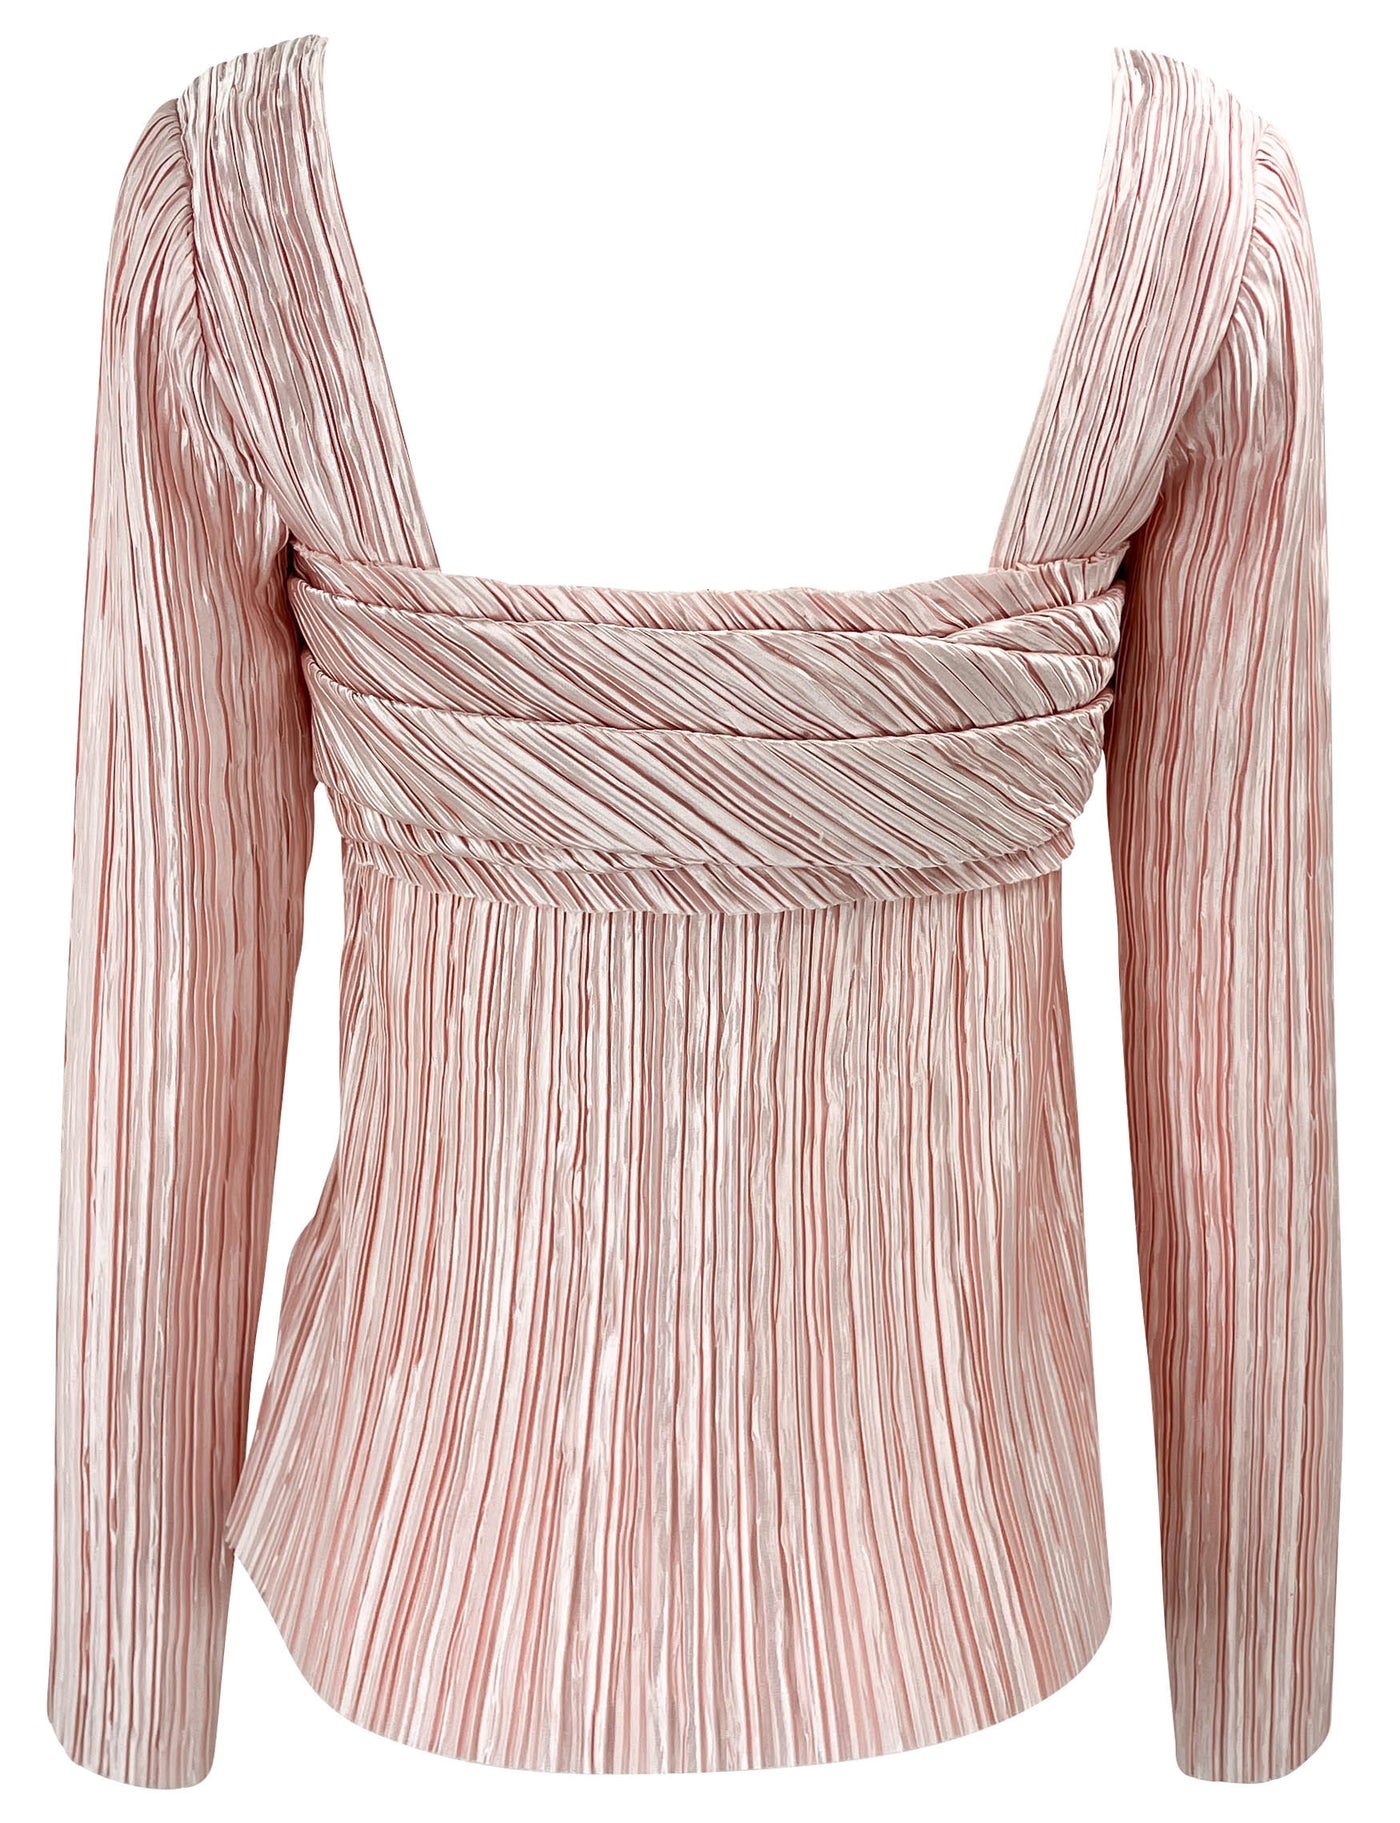 Marina Moscone Long Sleeve Plissé Top in Pale Pink - Discounts on Marina Moscone at UAL